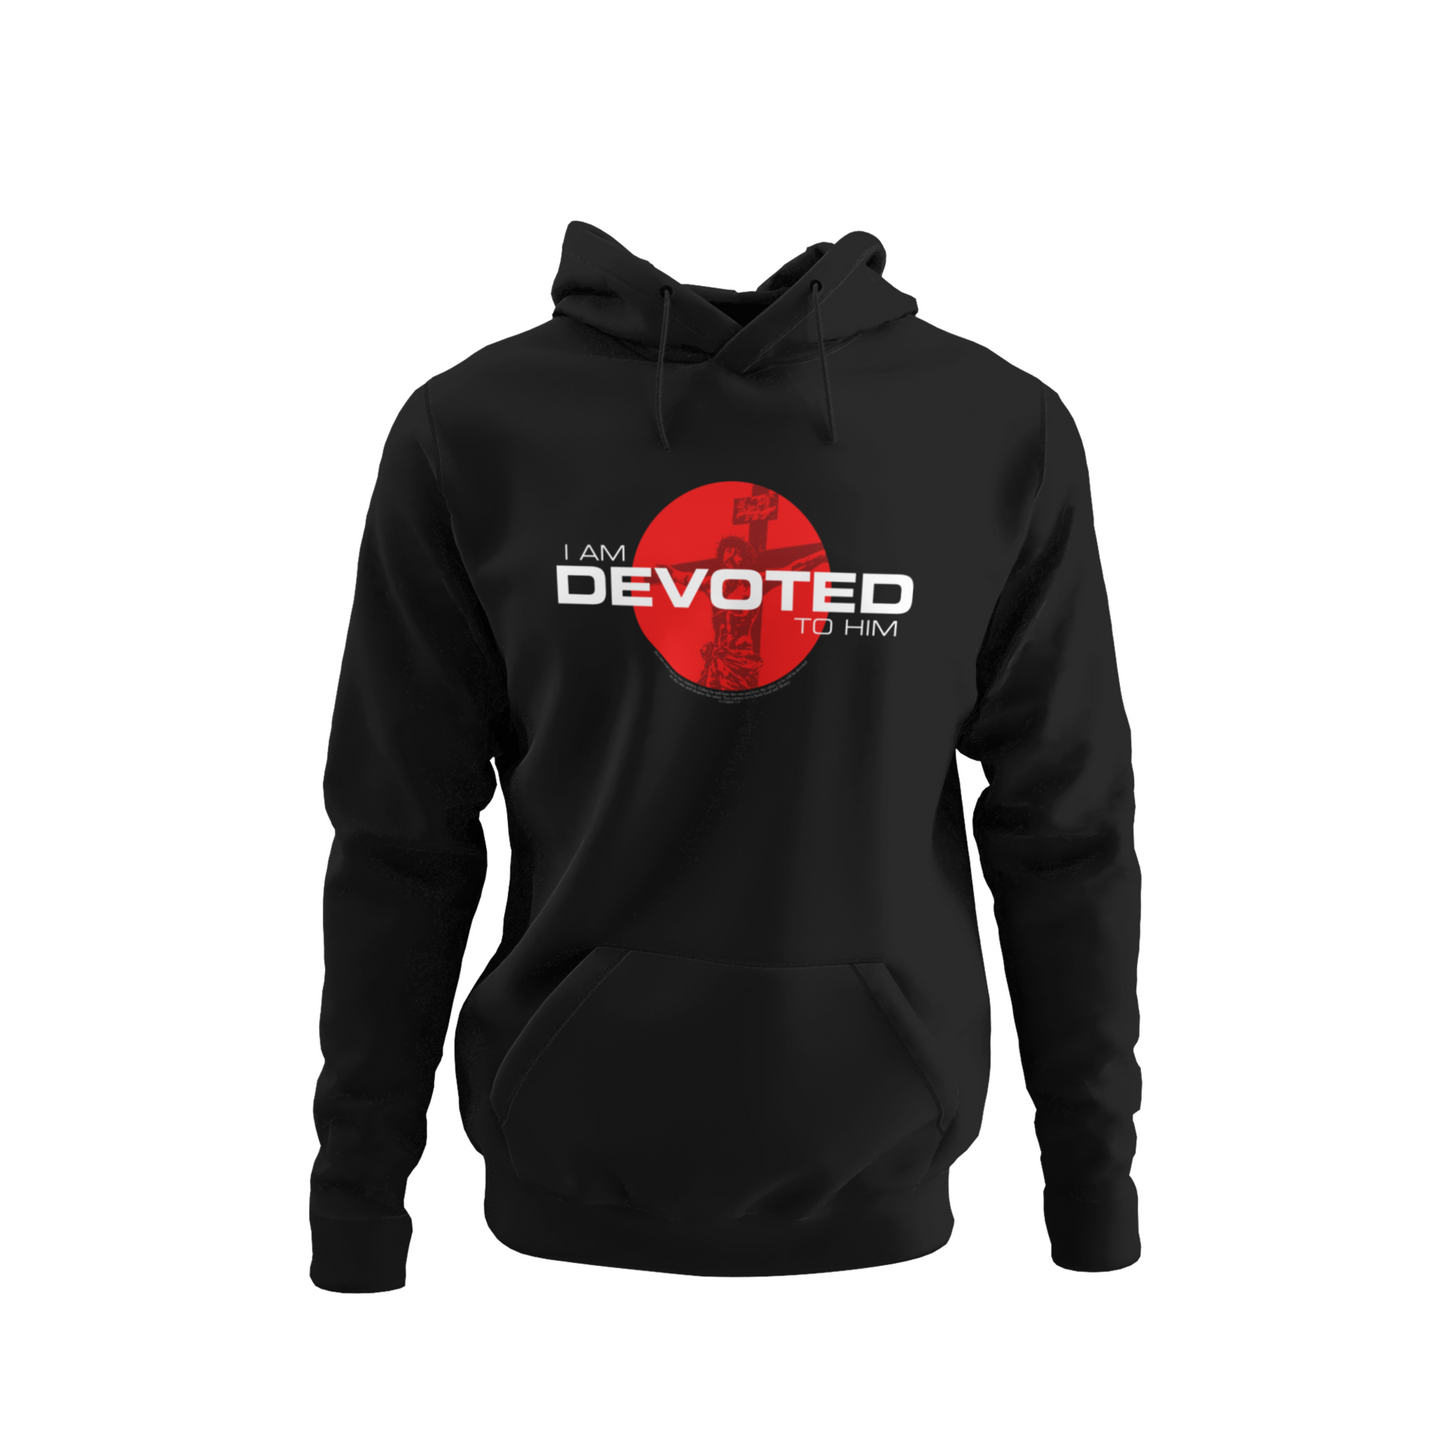 I am Devoted to Him. Hoodie.